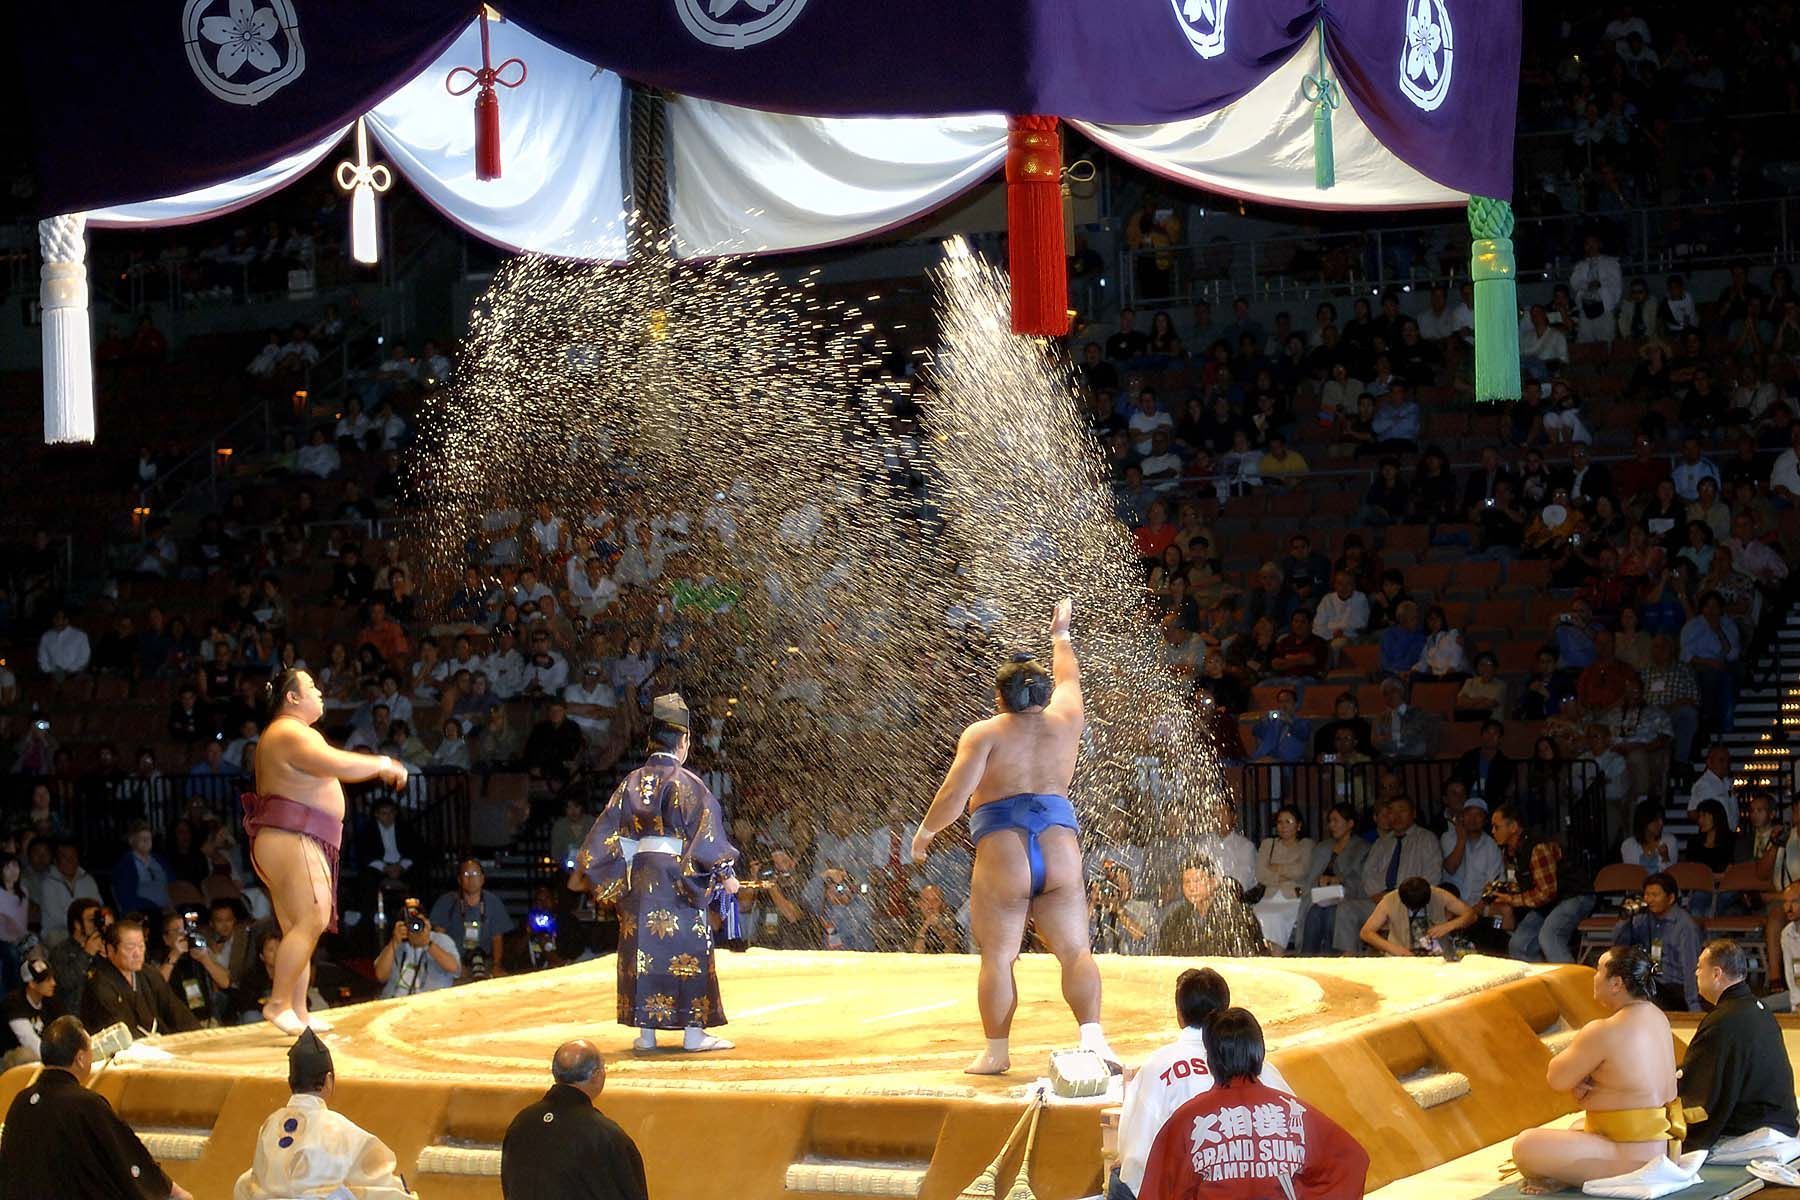 Sumo wrestlers throw salt before a match to purify the ring